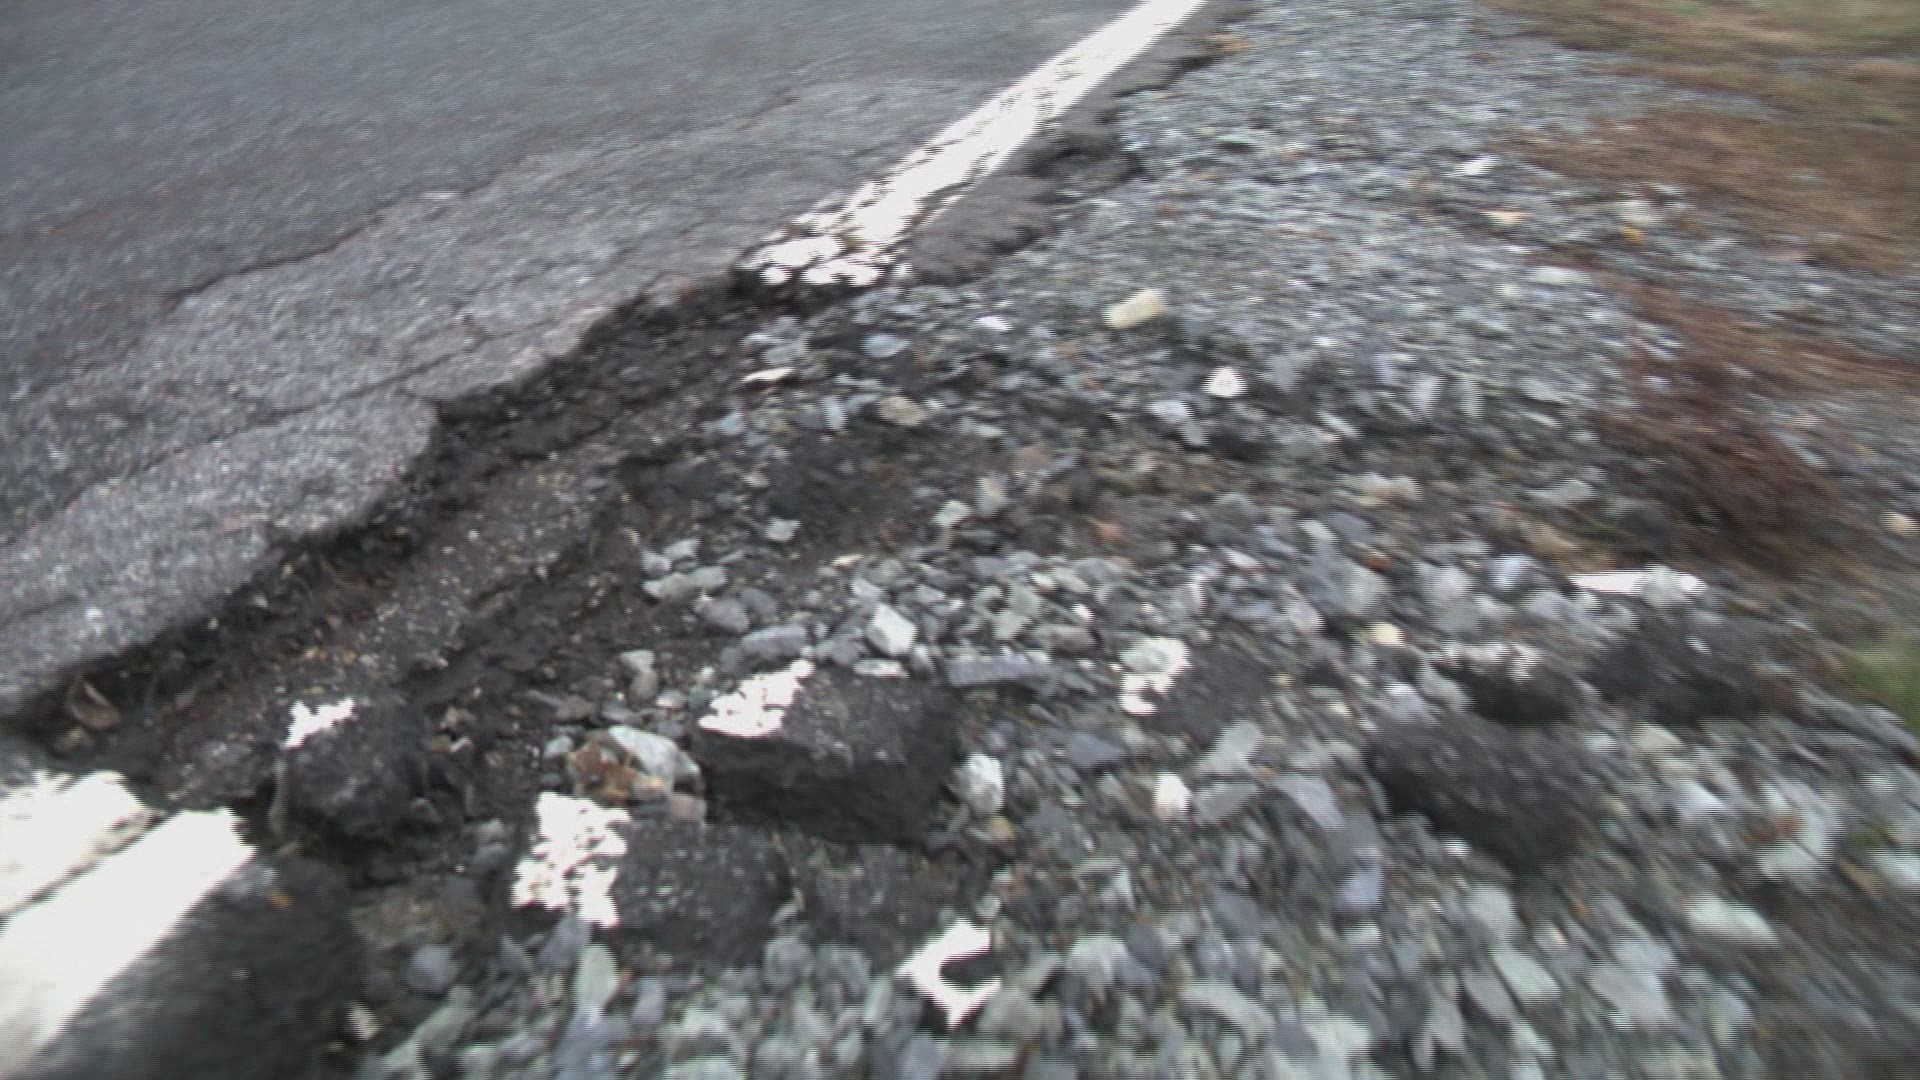 After record rainfall over the weekend in some mountain counties that damaged roads, Tuesday's rain made it tough for crews to make repairs on schedule.